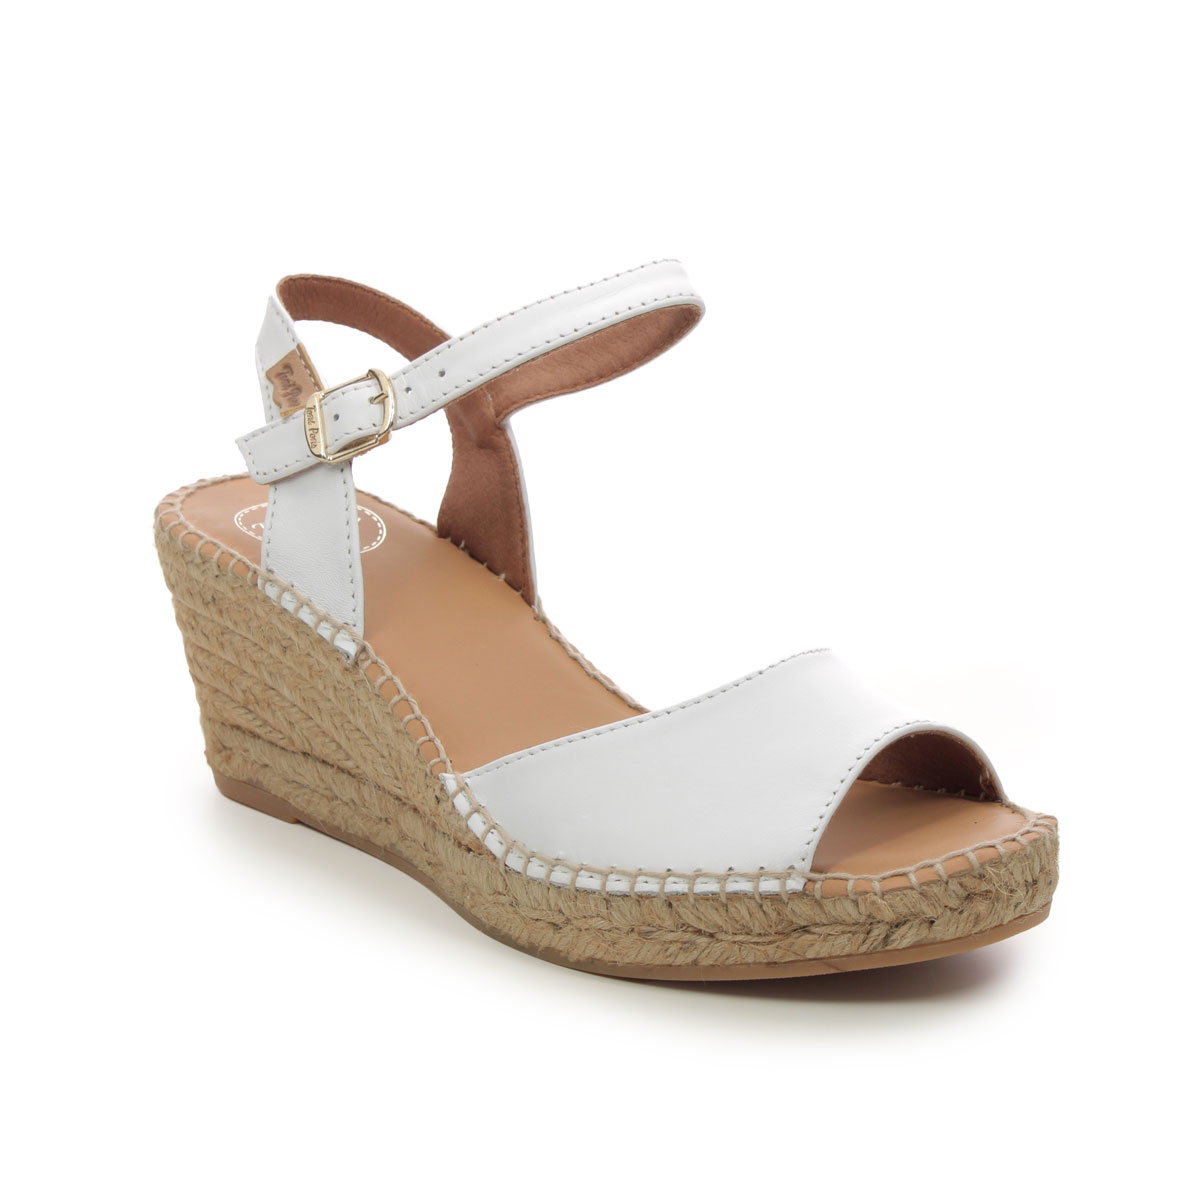 Toni Pons Sia P 5 WHITE LEATHER Womens Espadrilles 4008-61 in a Plain Leather in Size 36